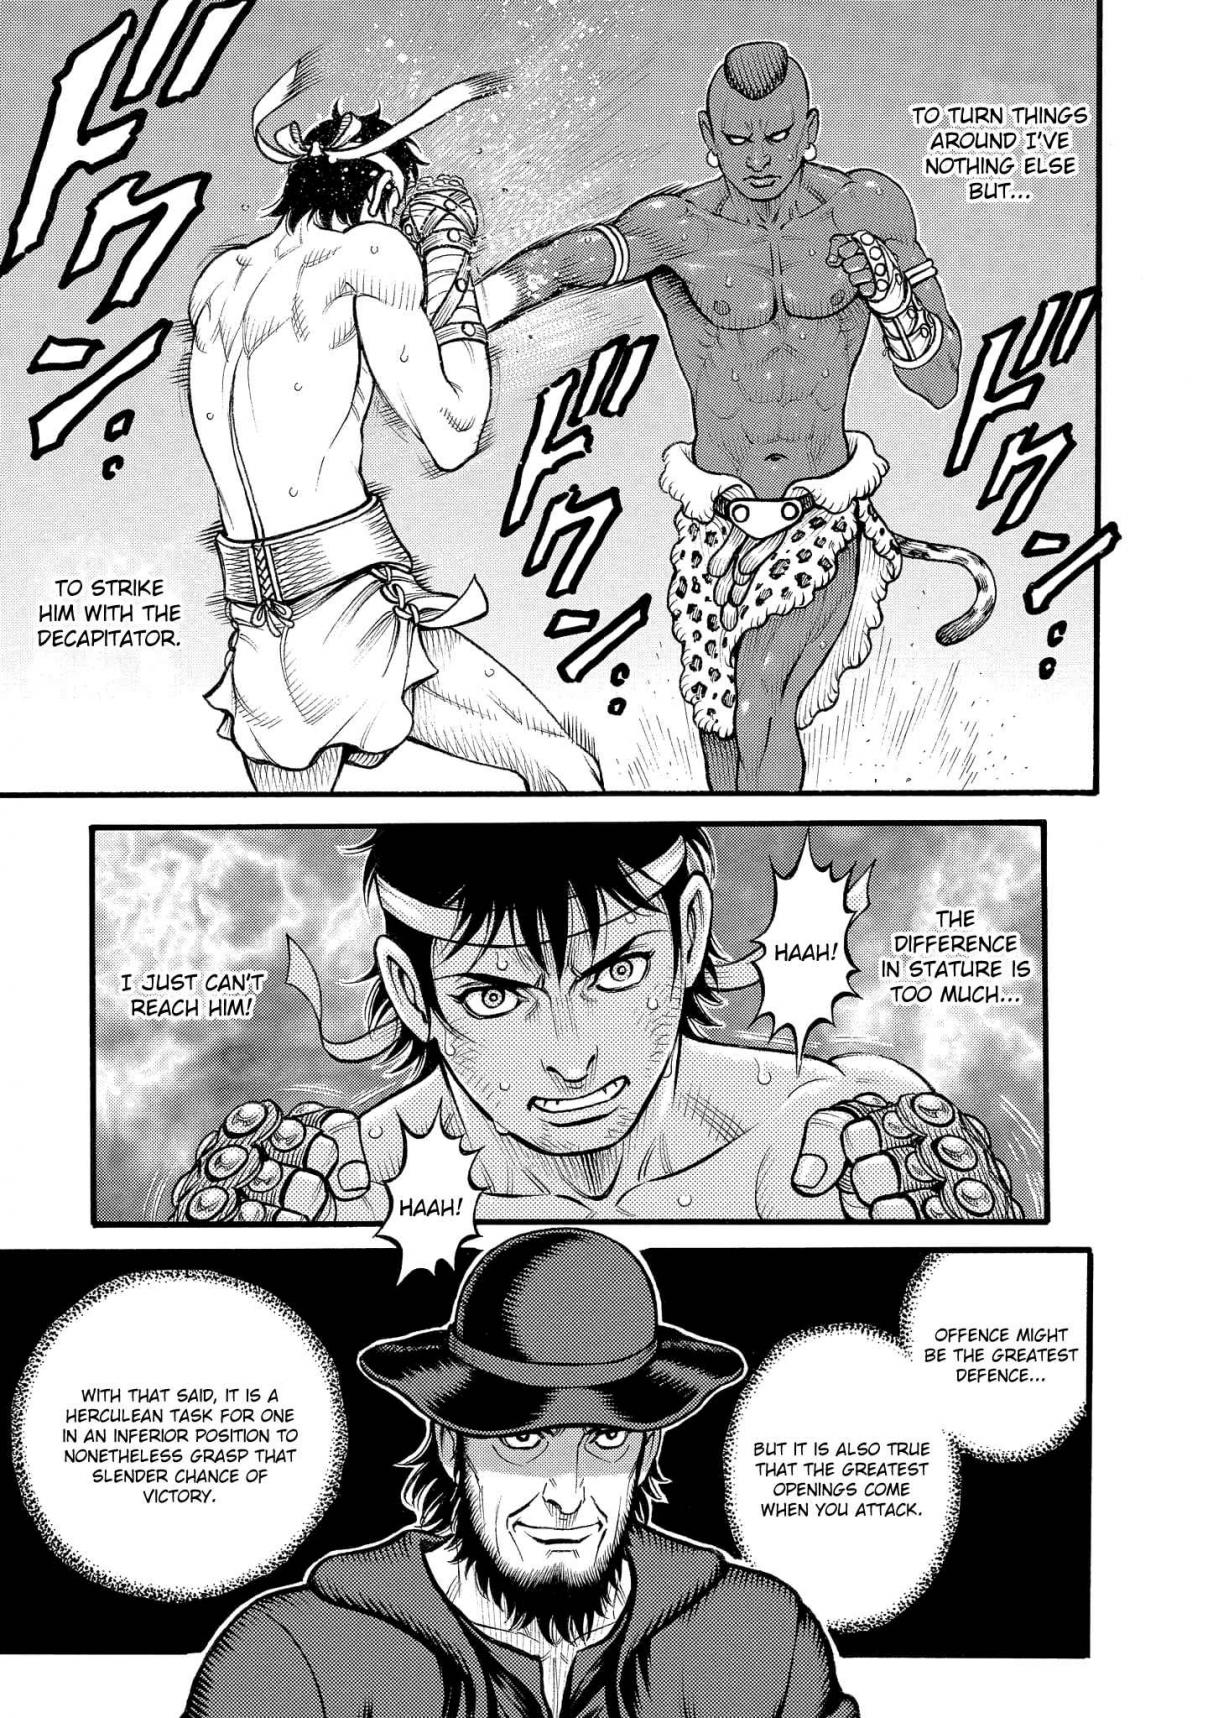 Kendo Shitouden Cestvs Vol. 7 Ch. 70 A Slender Chance of Victory